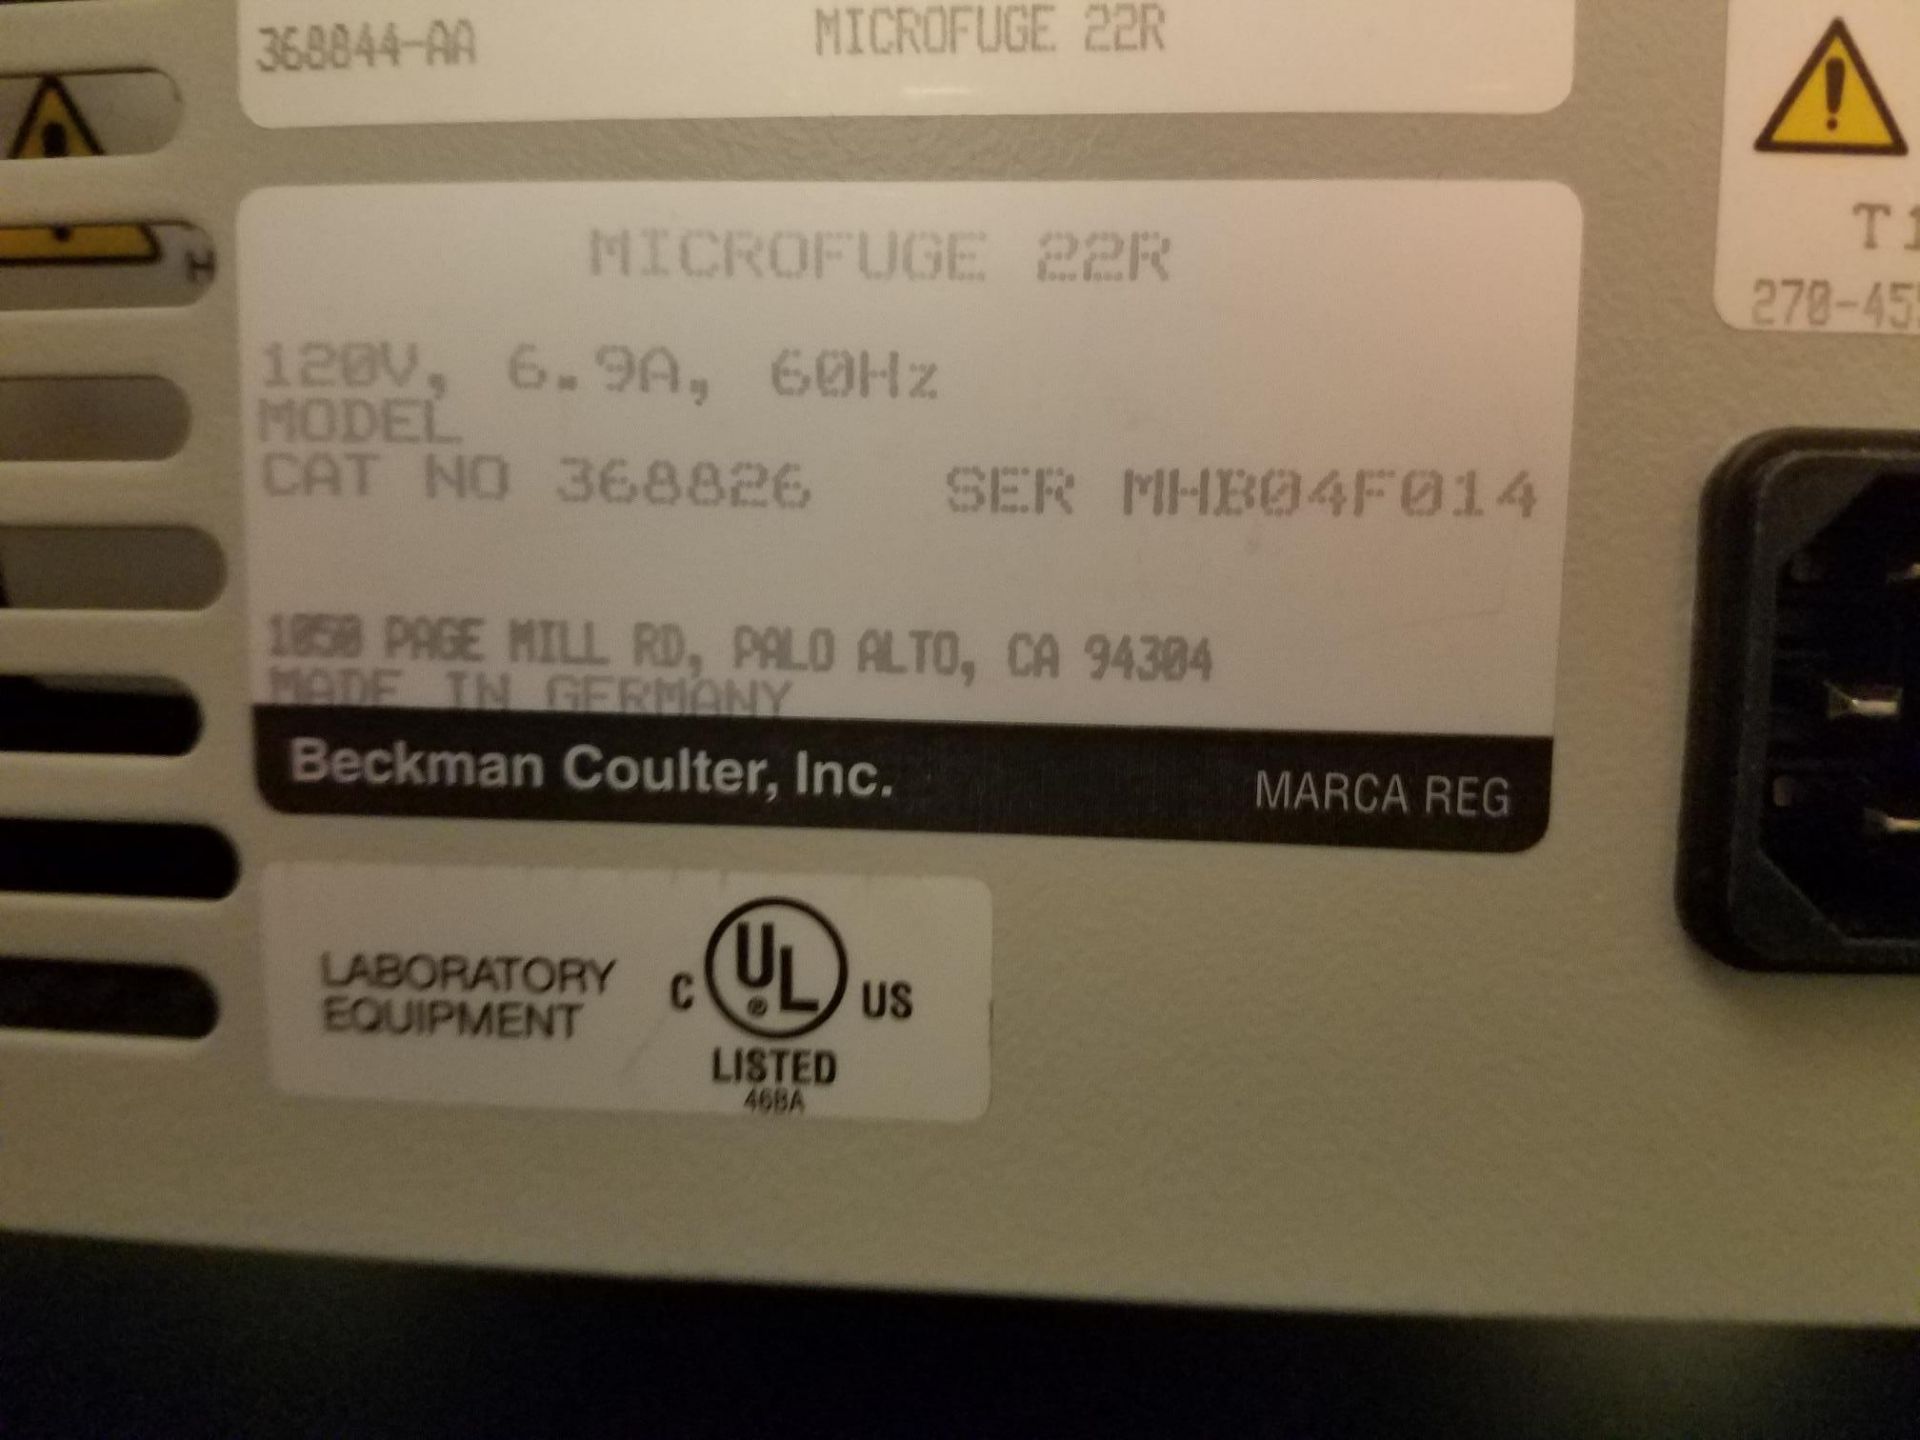 Beckman Coulter, Microfuge 22R Centrifuge, M# 368826, S/N MHB04F014 - Image 2 of 2